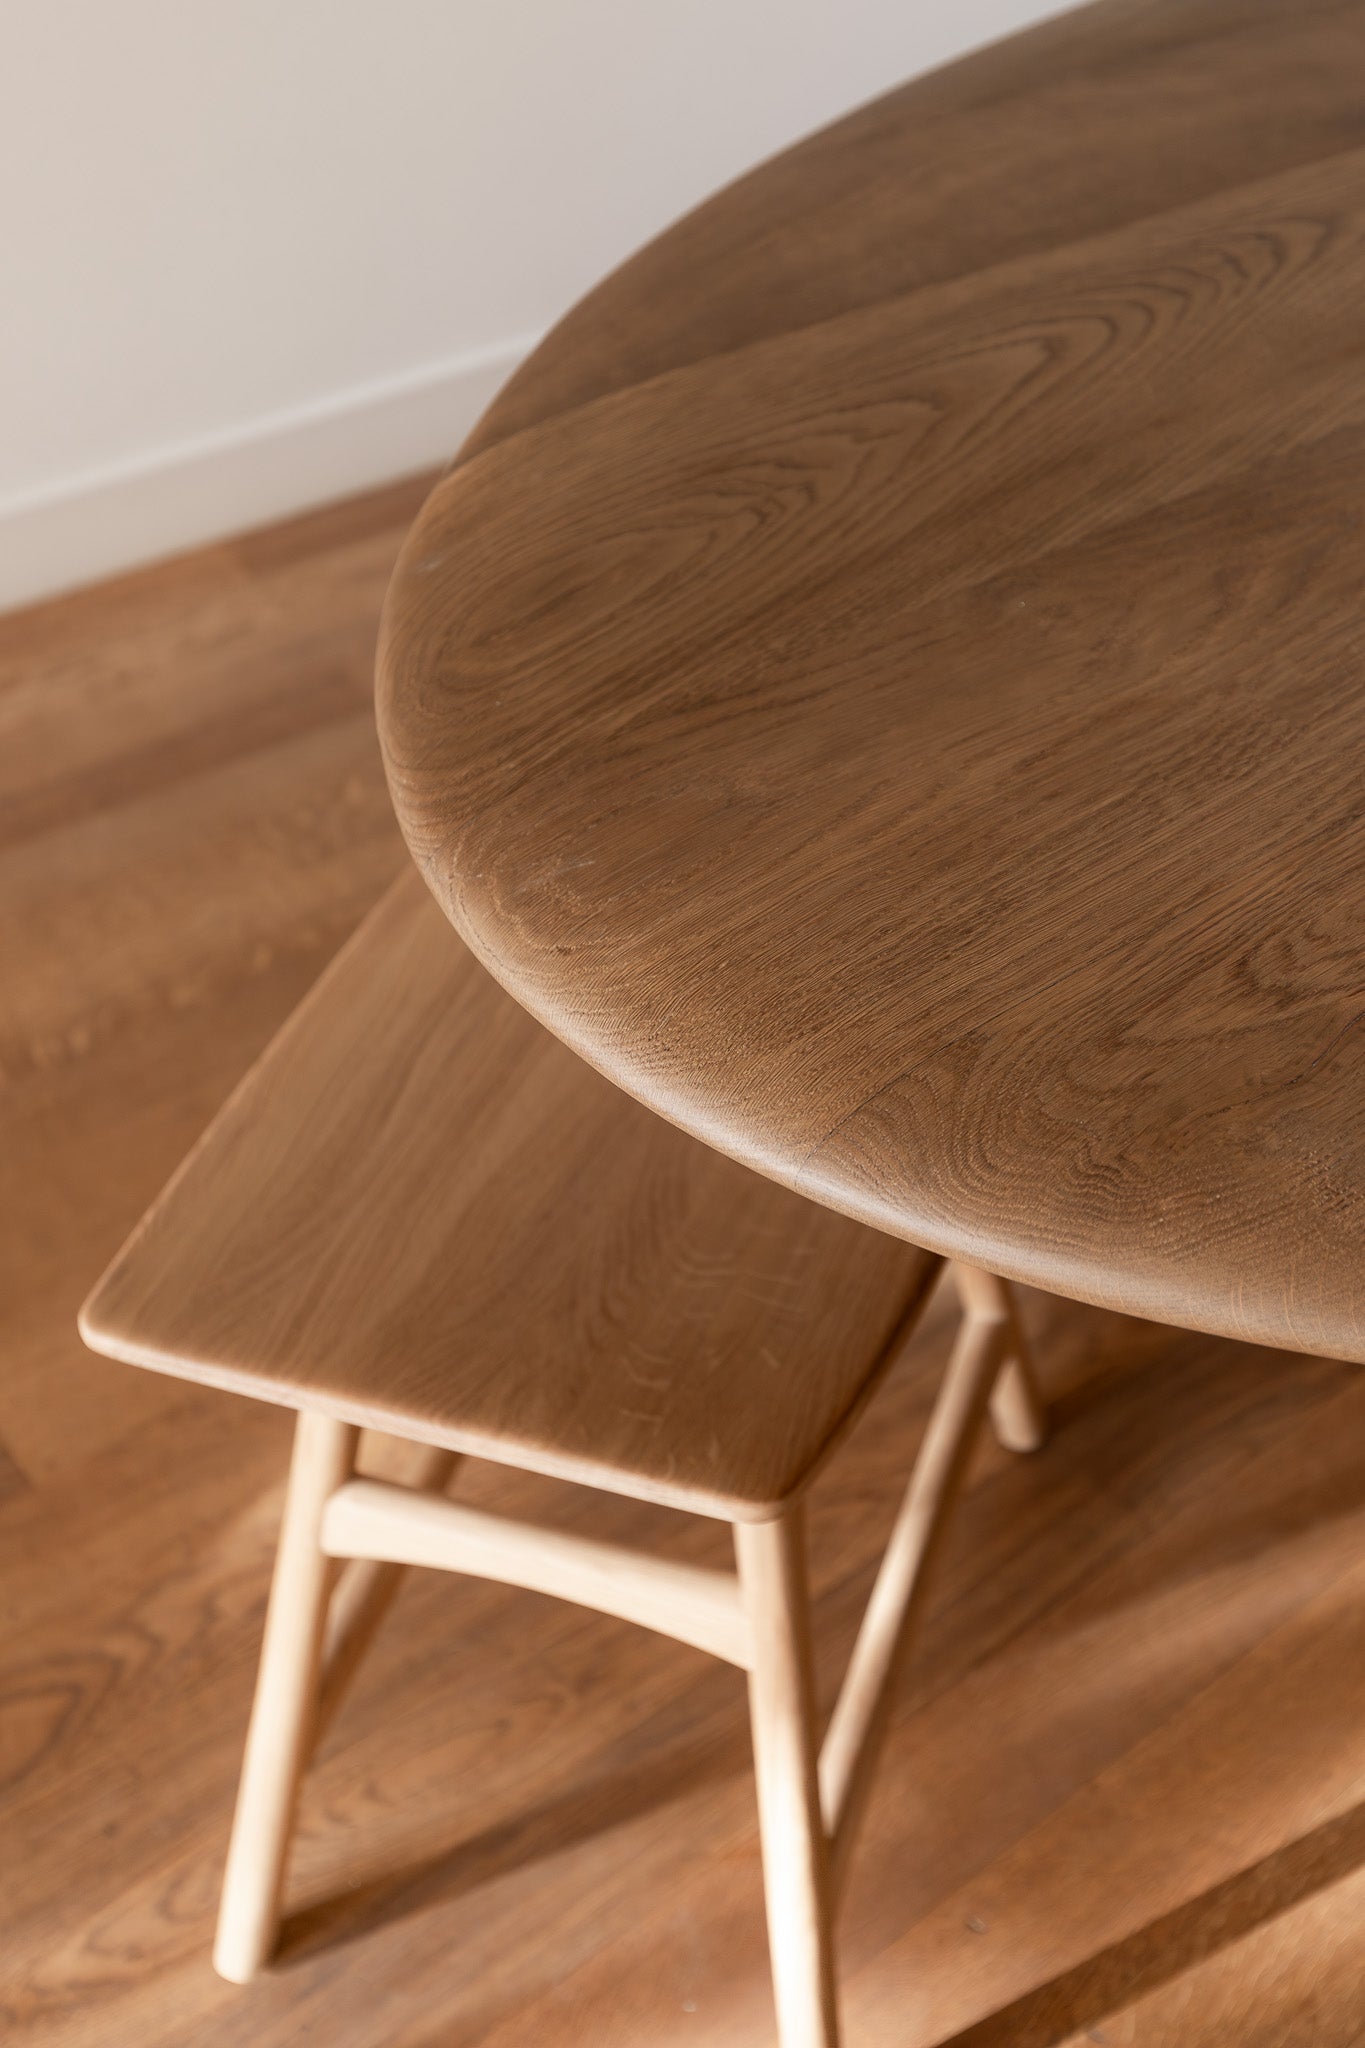 L'Ovale Table Hubert Crijns with osso stool by ethnicraft